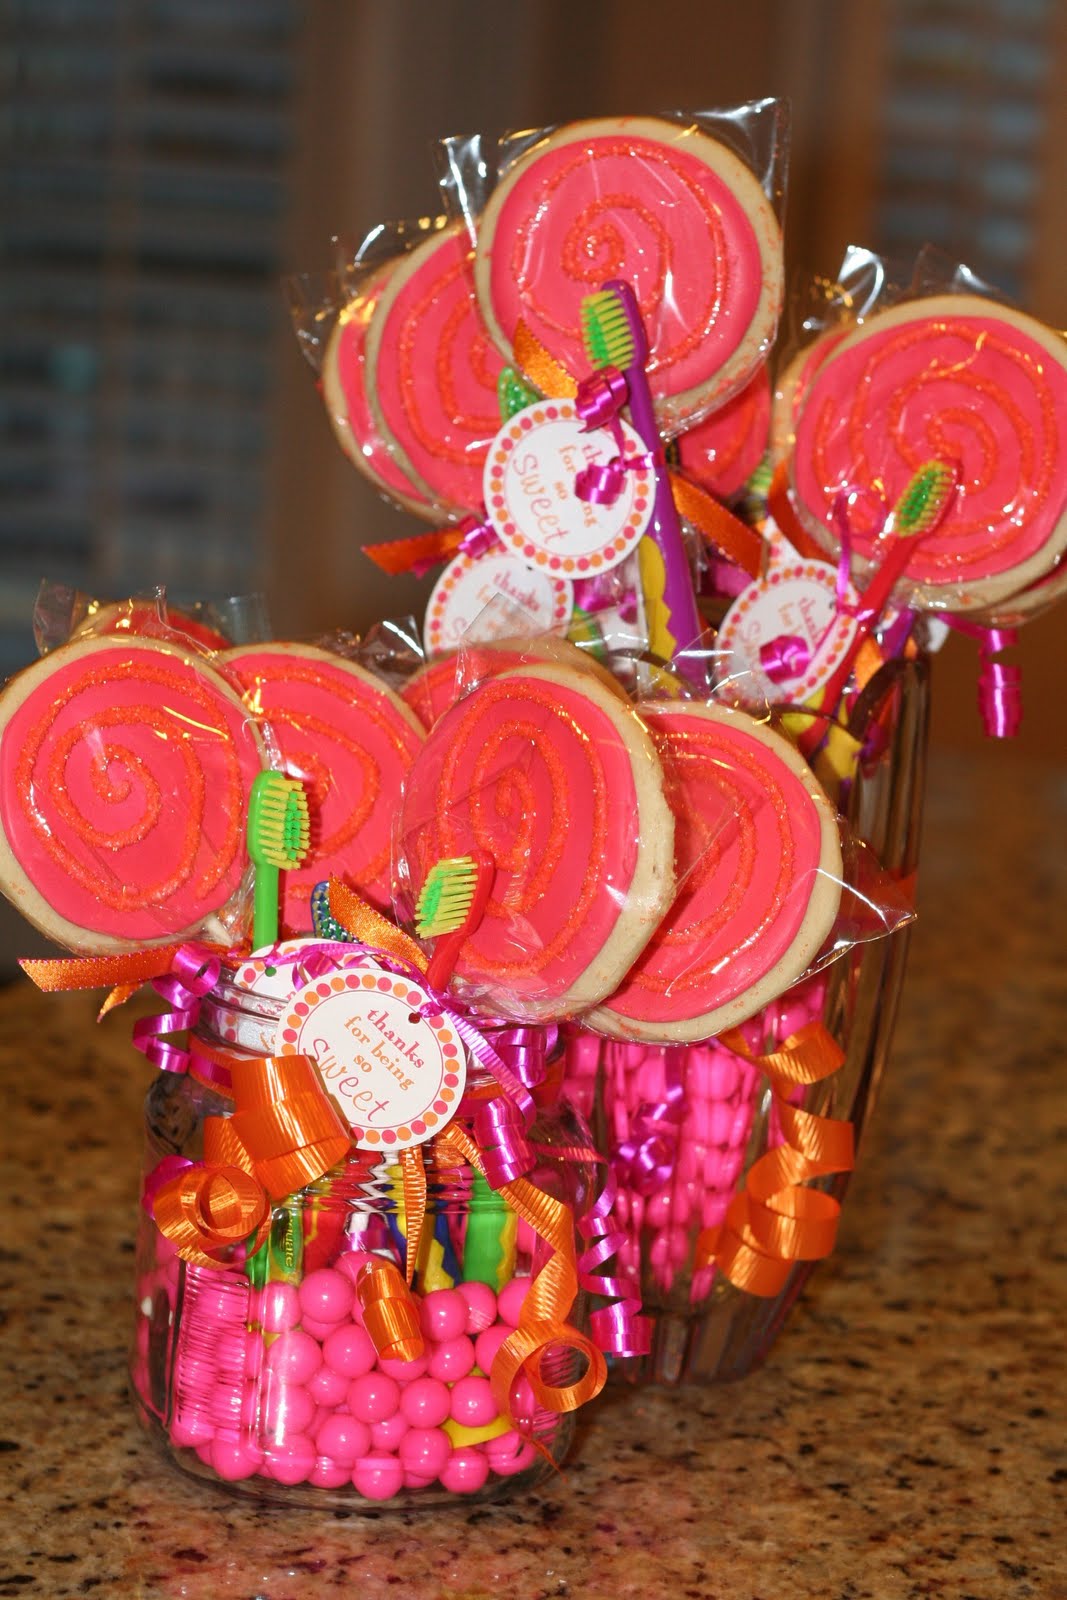 Candyland Party Theme Centerpieces